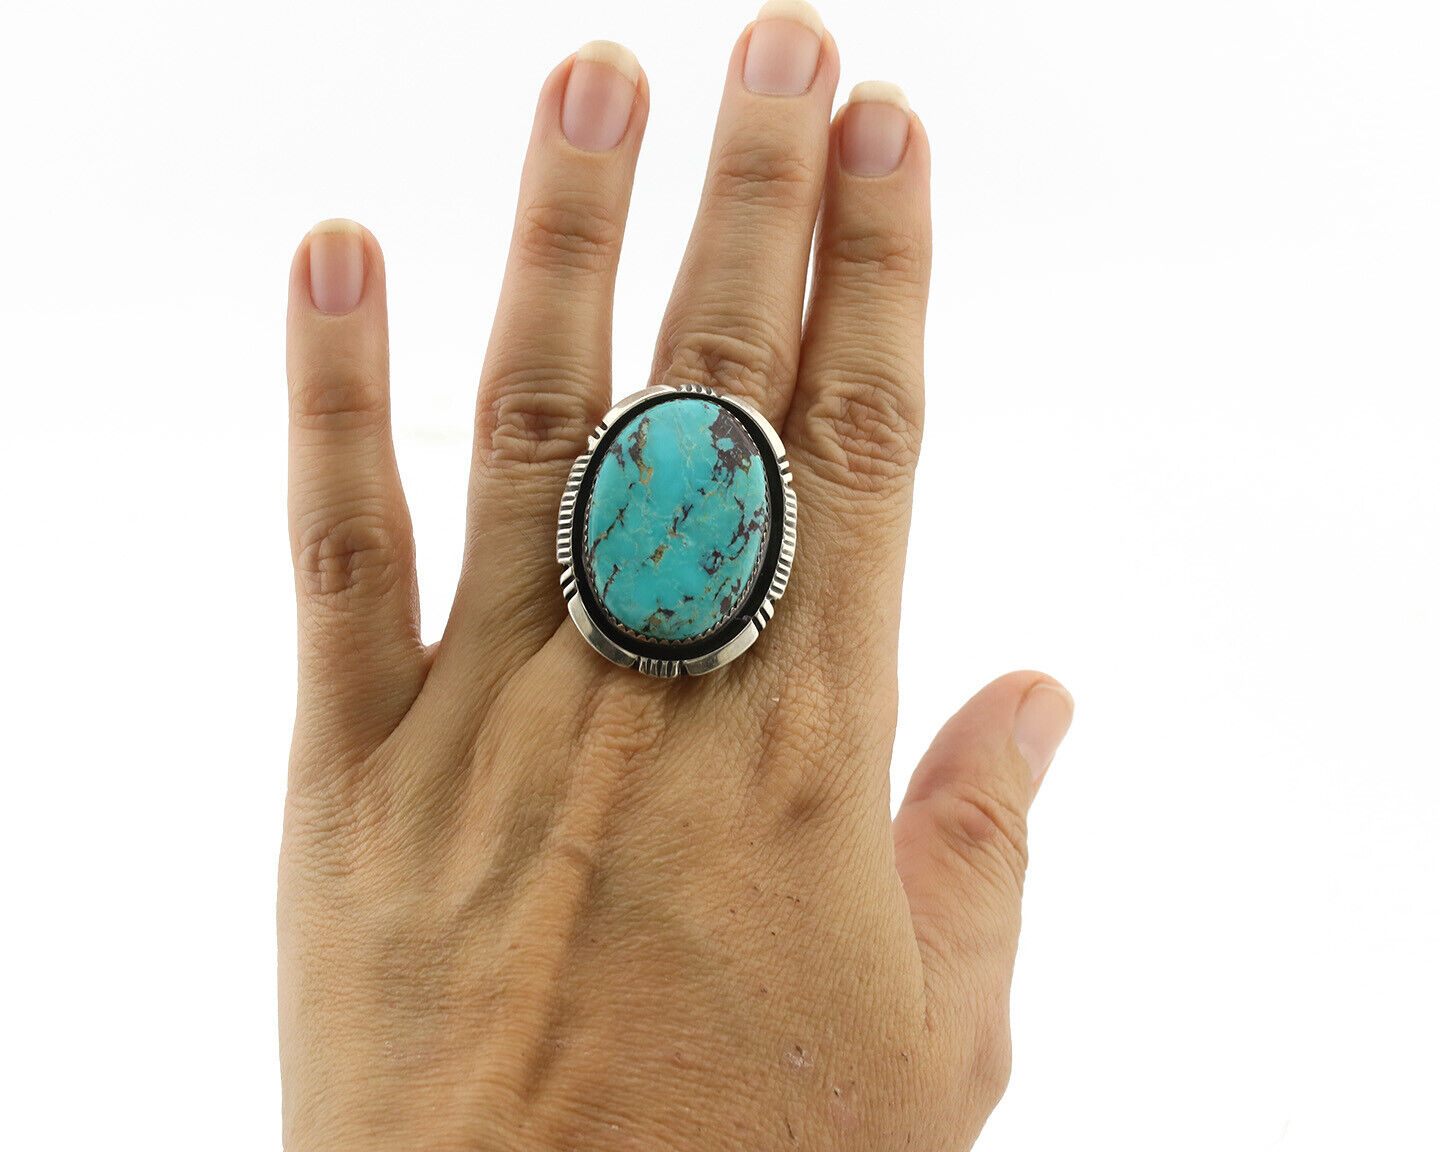 Navajo Ring .925 Silver Natural Turquoise Artist Signed William Denetdale C.80s